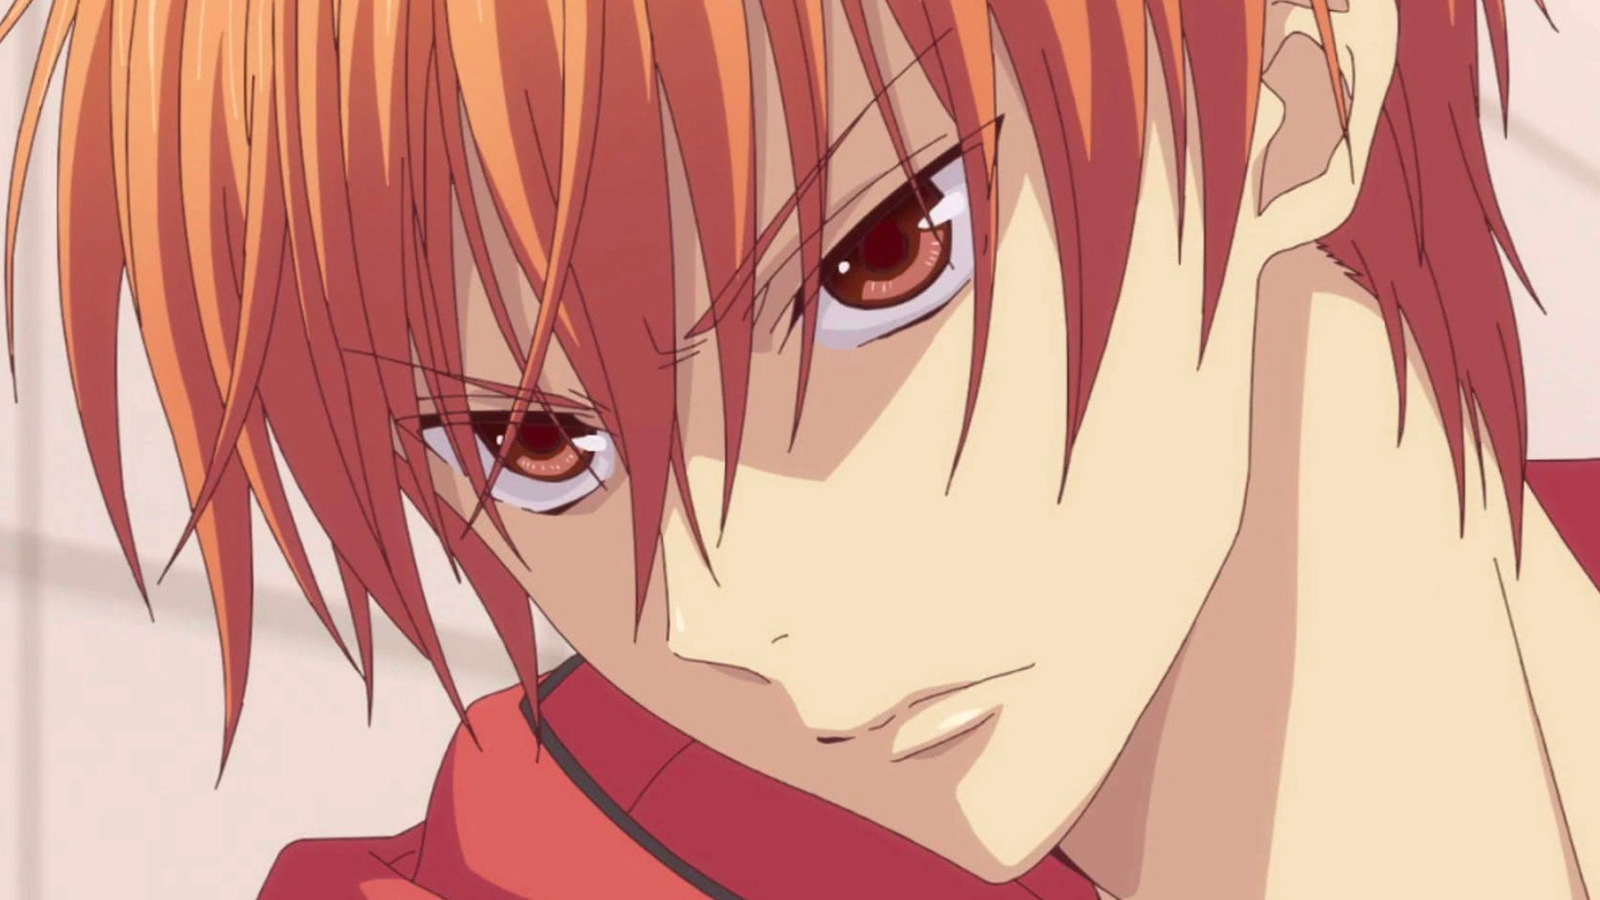 A male character from Fruits Basket has an angry expression. 